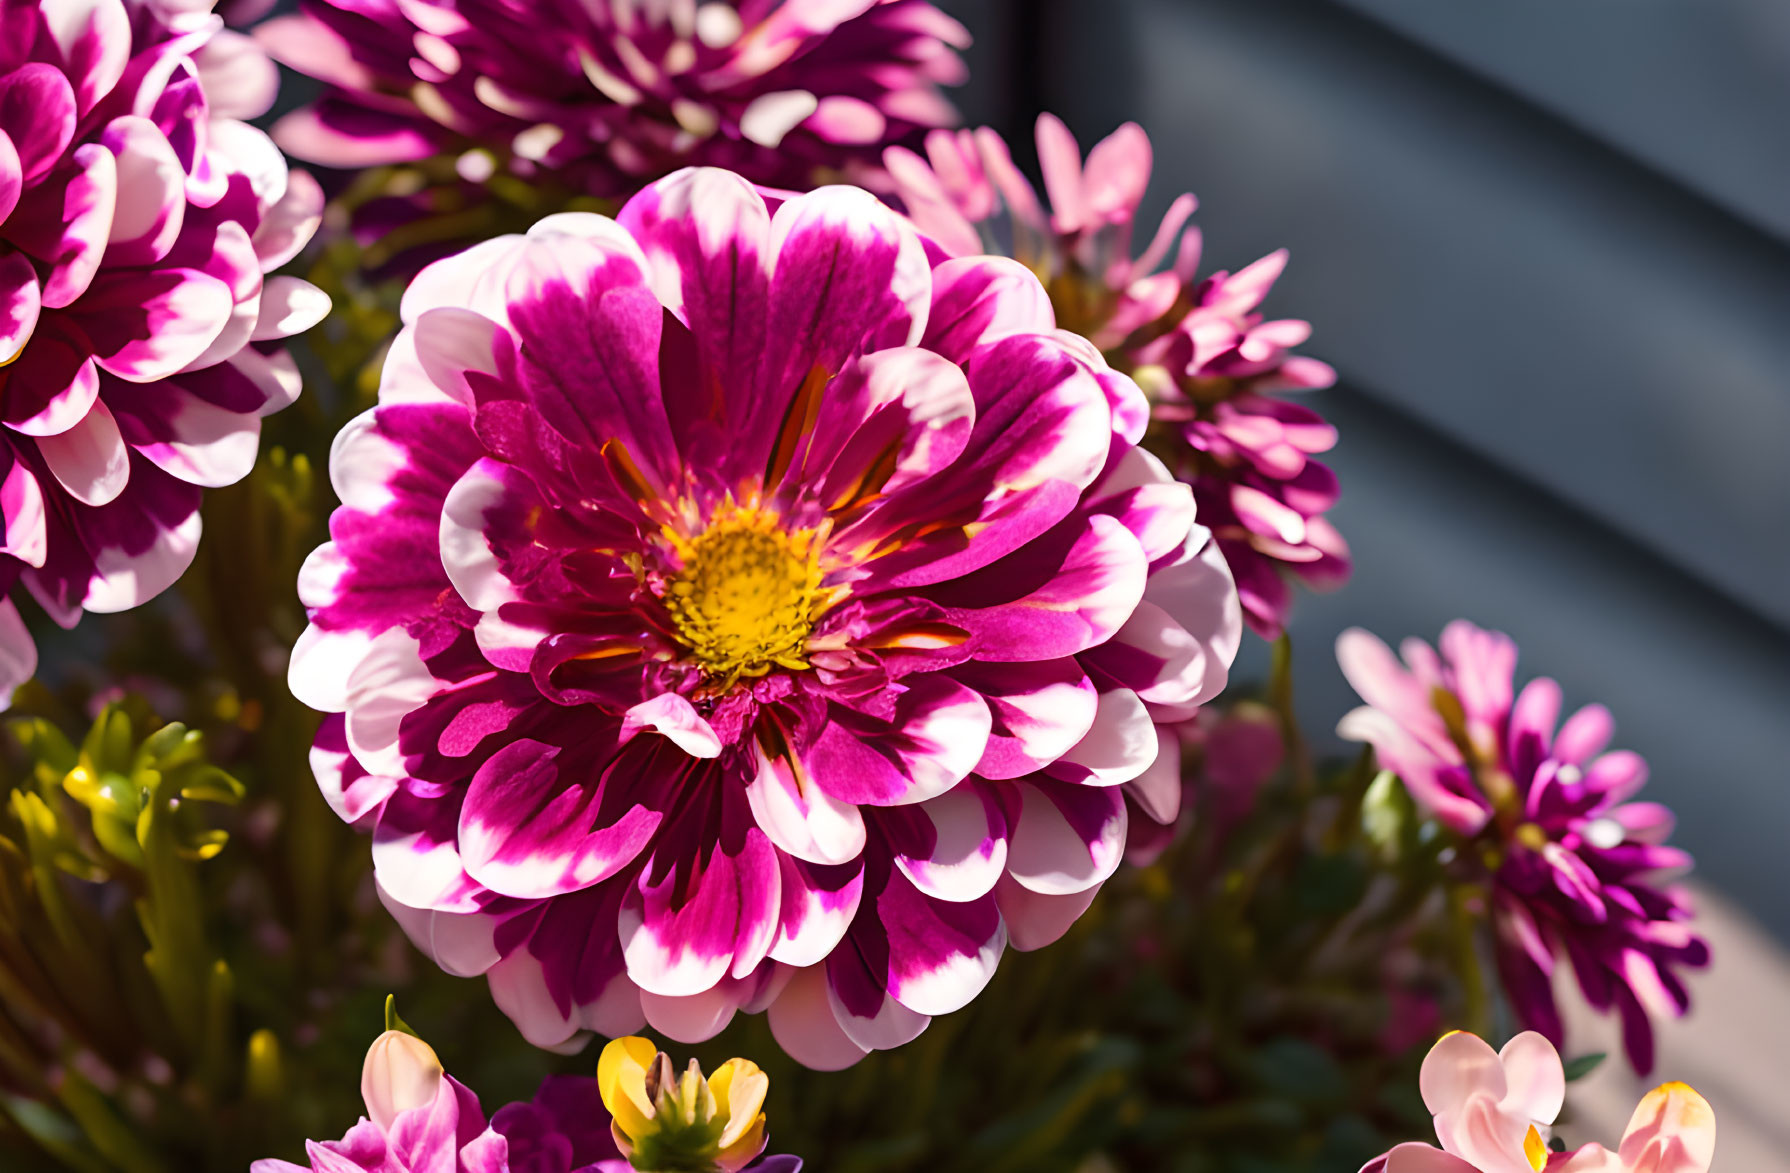 Pink and White Dahlia Flowers in Bloom with Soft-focus Background